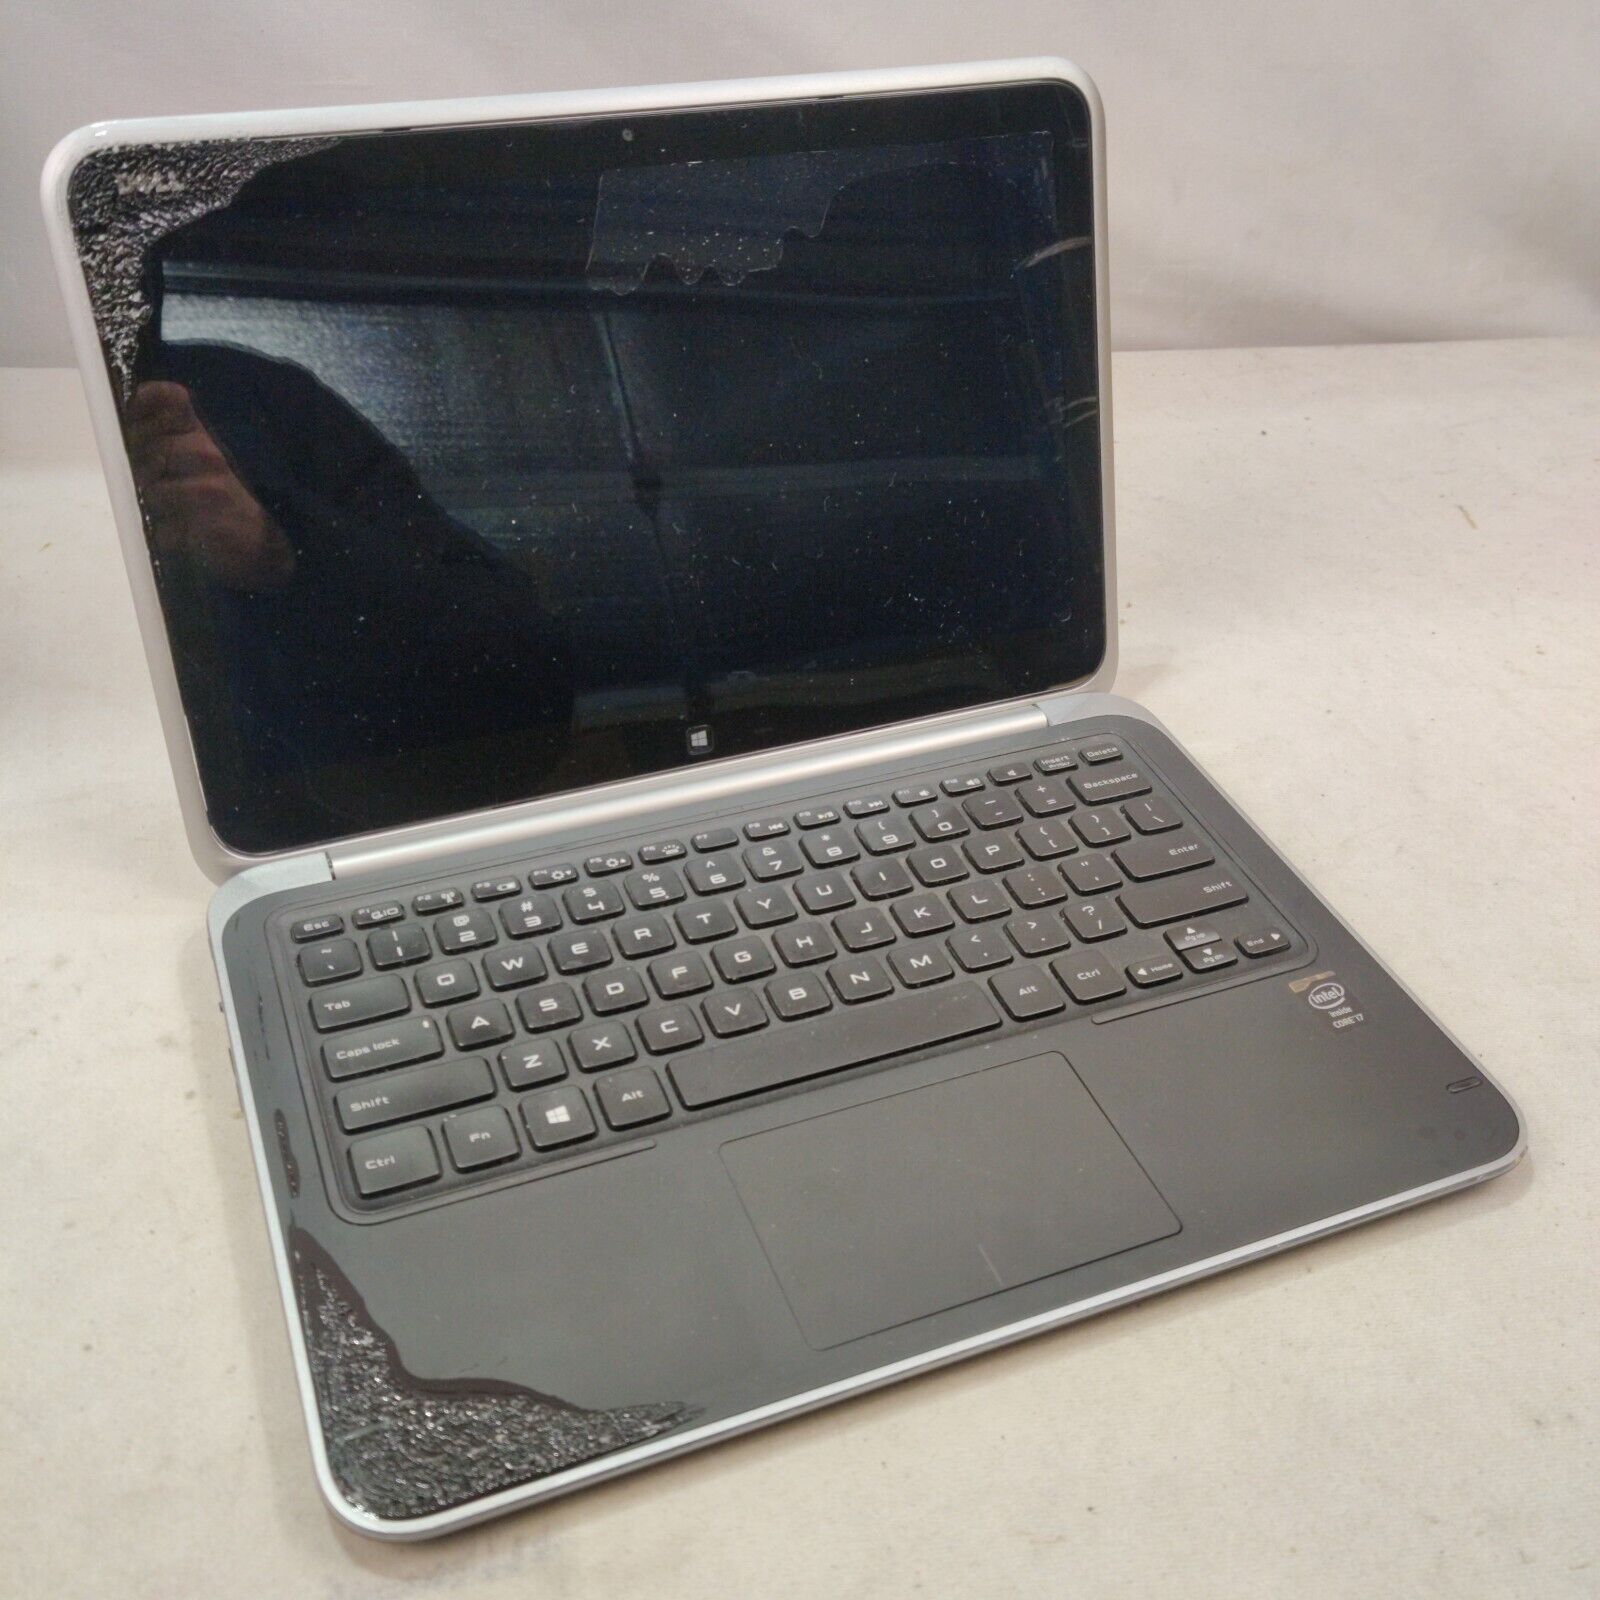  Dell XPS 12-9Q33 2-in-1 Touchscreen Core i7-4650U 8GB Ram No Sdd FOR PARTS ONLY